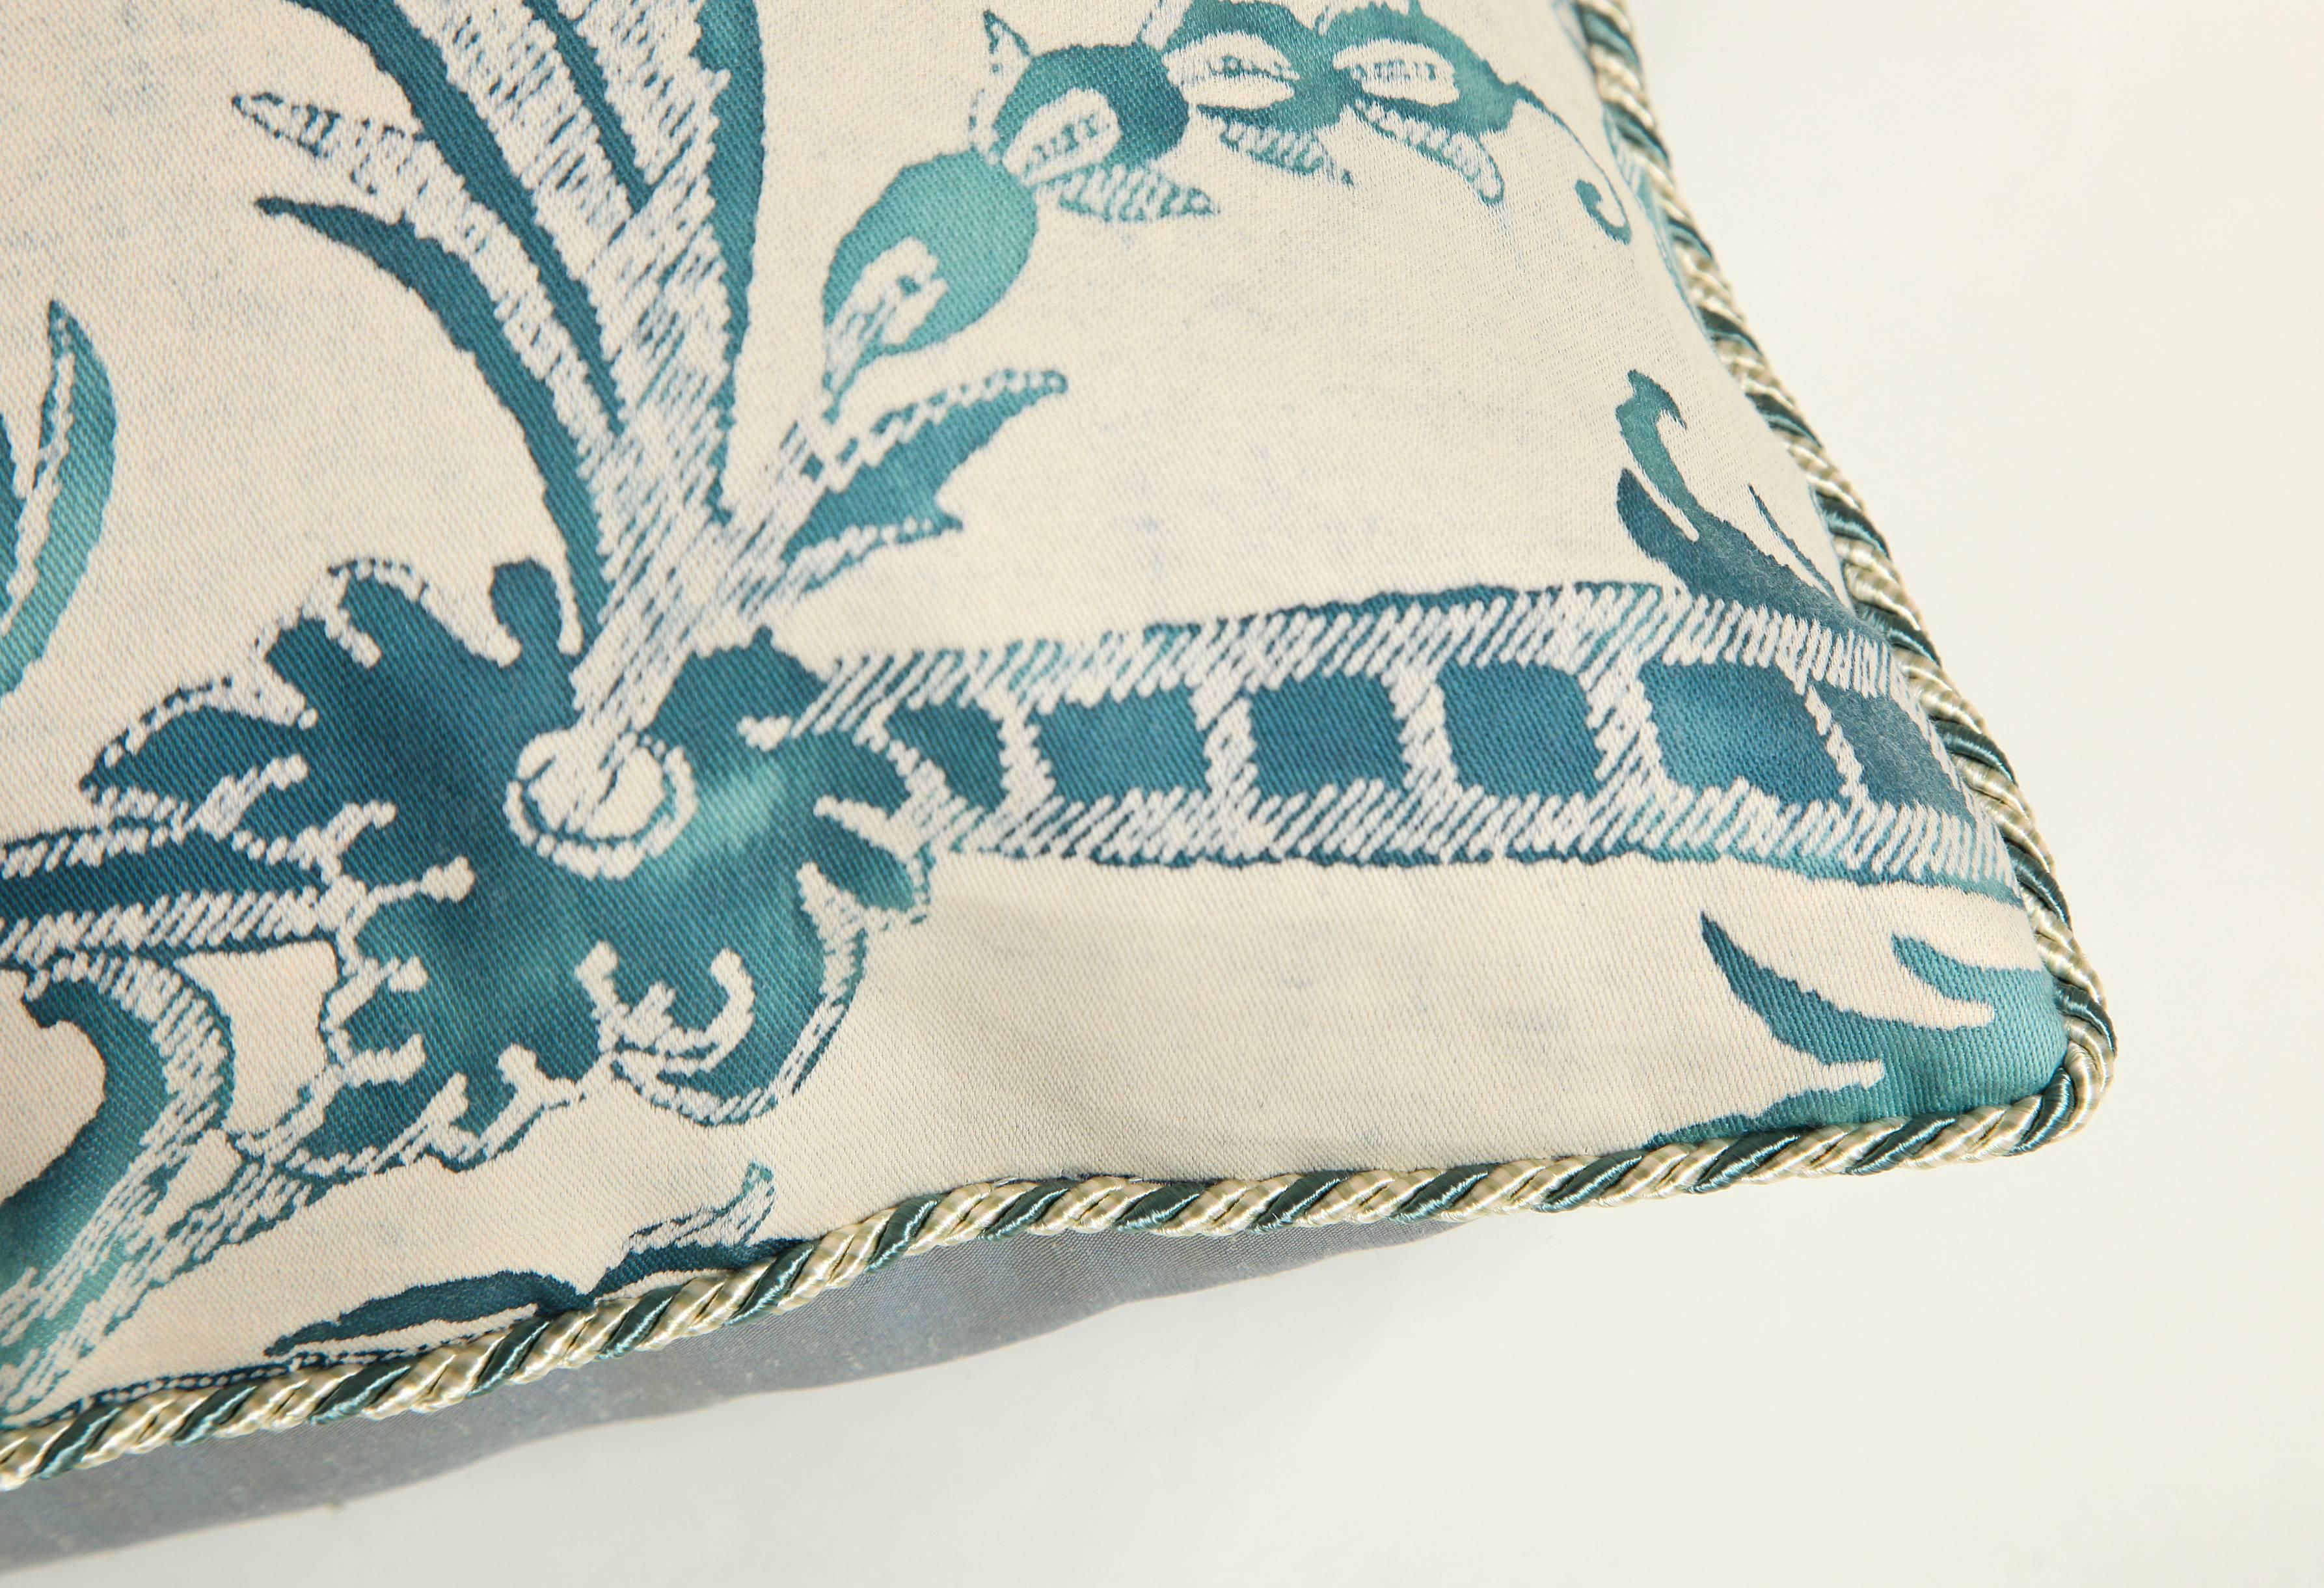 Pair of Fortuny Fabric Cushions in the Mazzarino Print 1